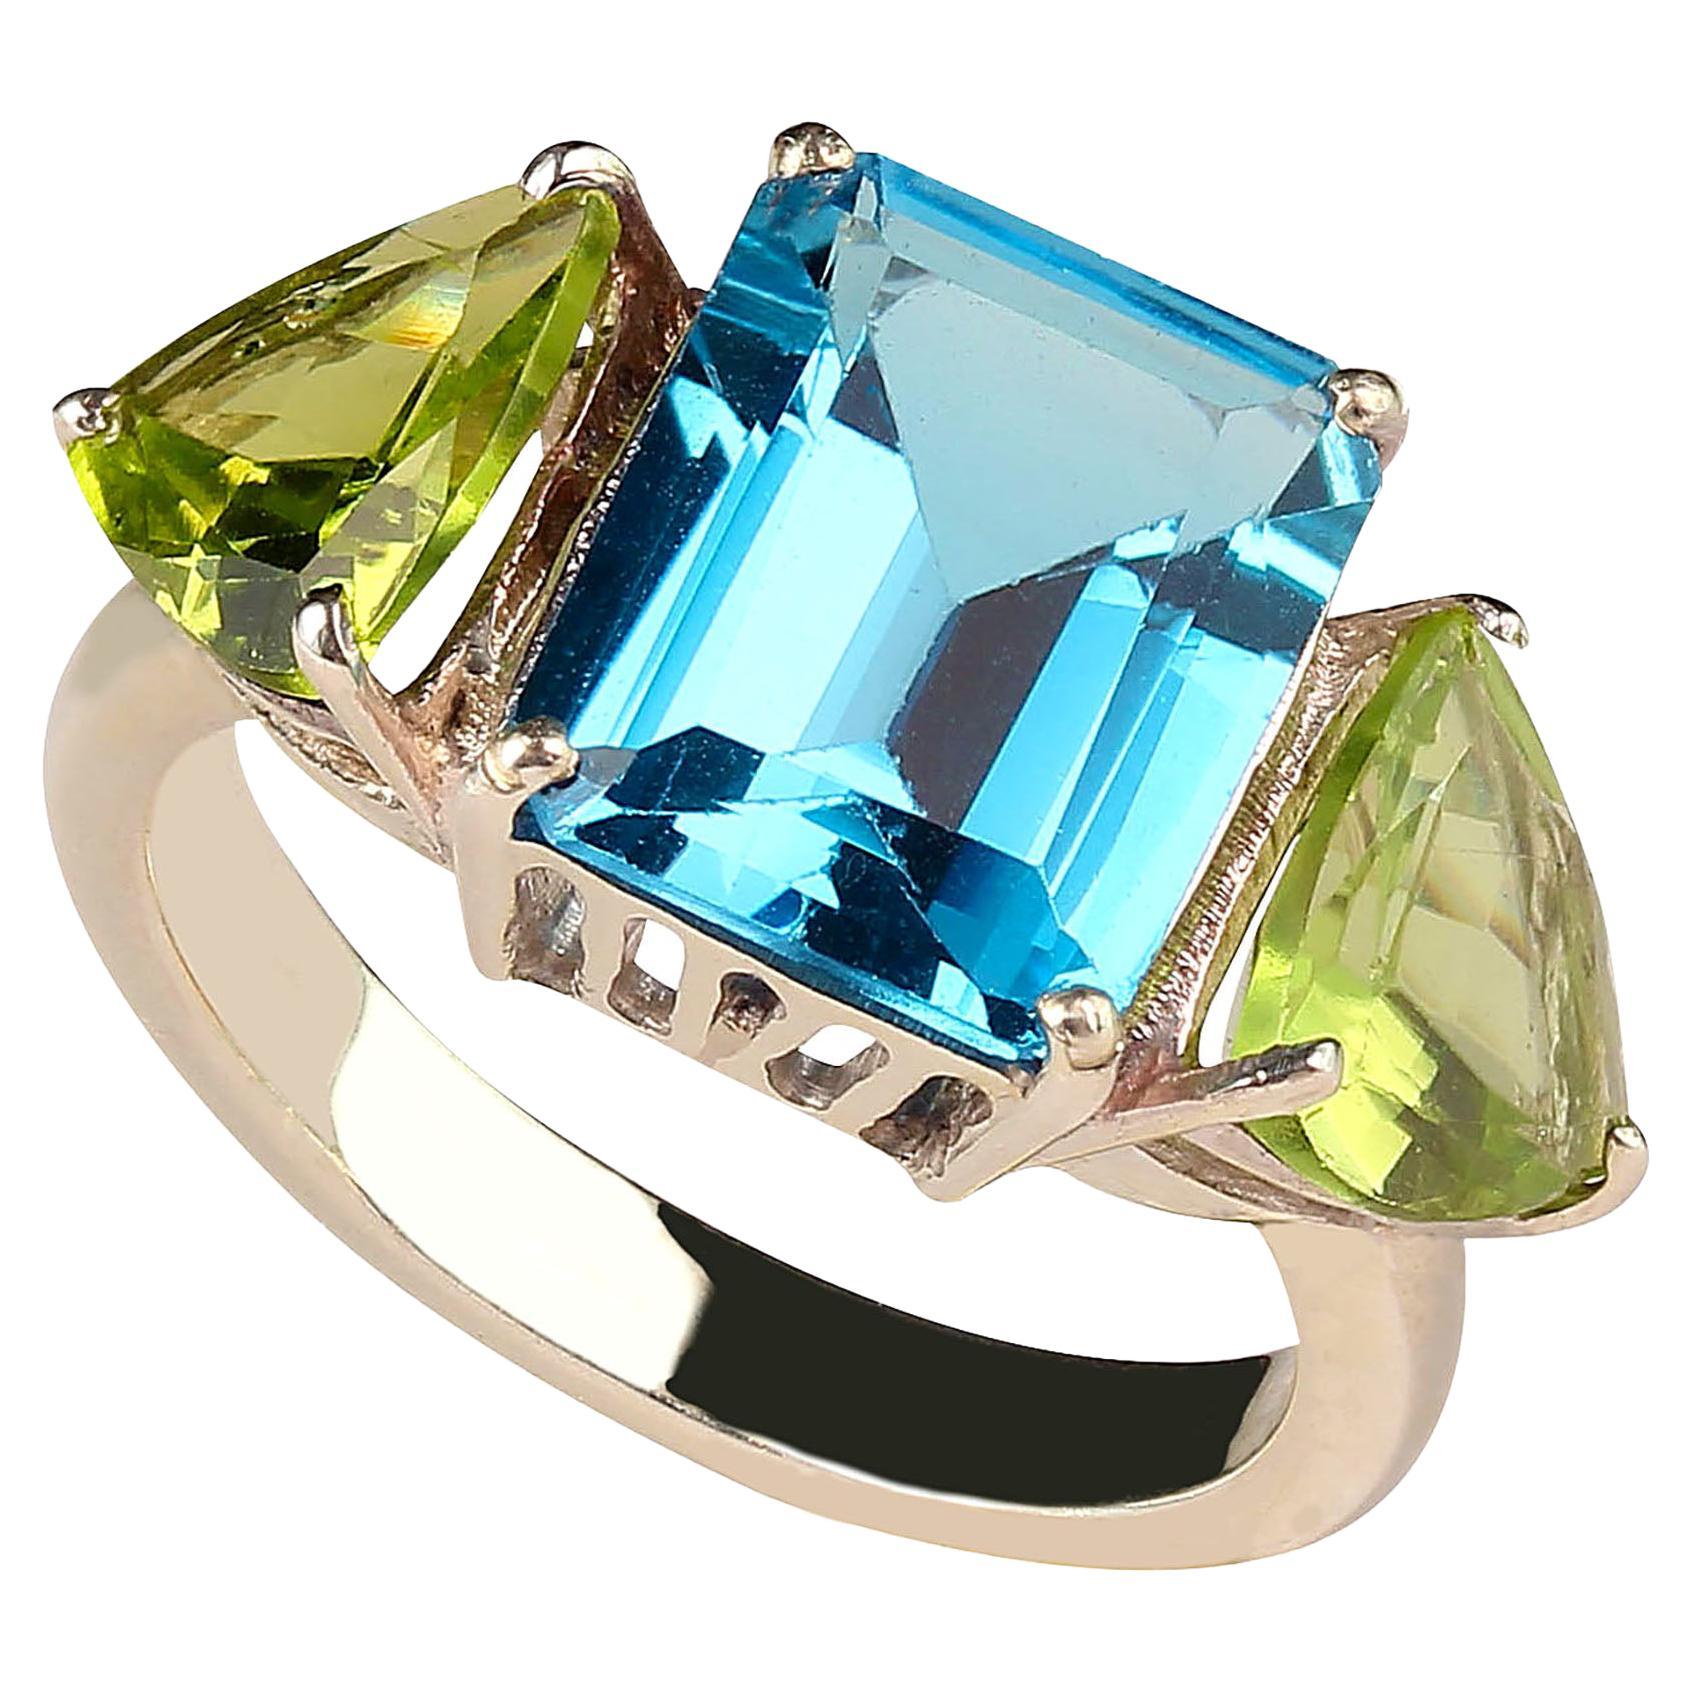 Sparkling favorite color of blue and green!  This sizable 6.5 sterling silver ring is a sure winner in Blue Topaz and green Peridot.  The emerald cut Blue Topaz, 4.4cts, is flanked by trillions of sparkling green Peridots, 4.4ctw. Wear this charmer